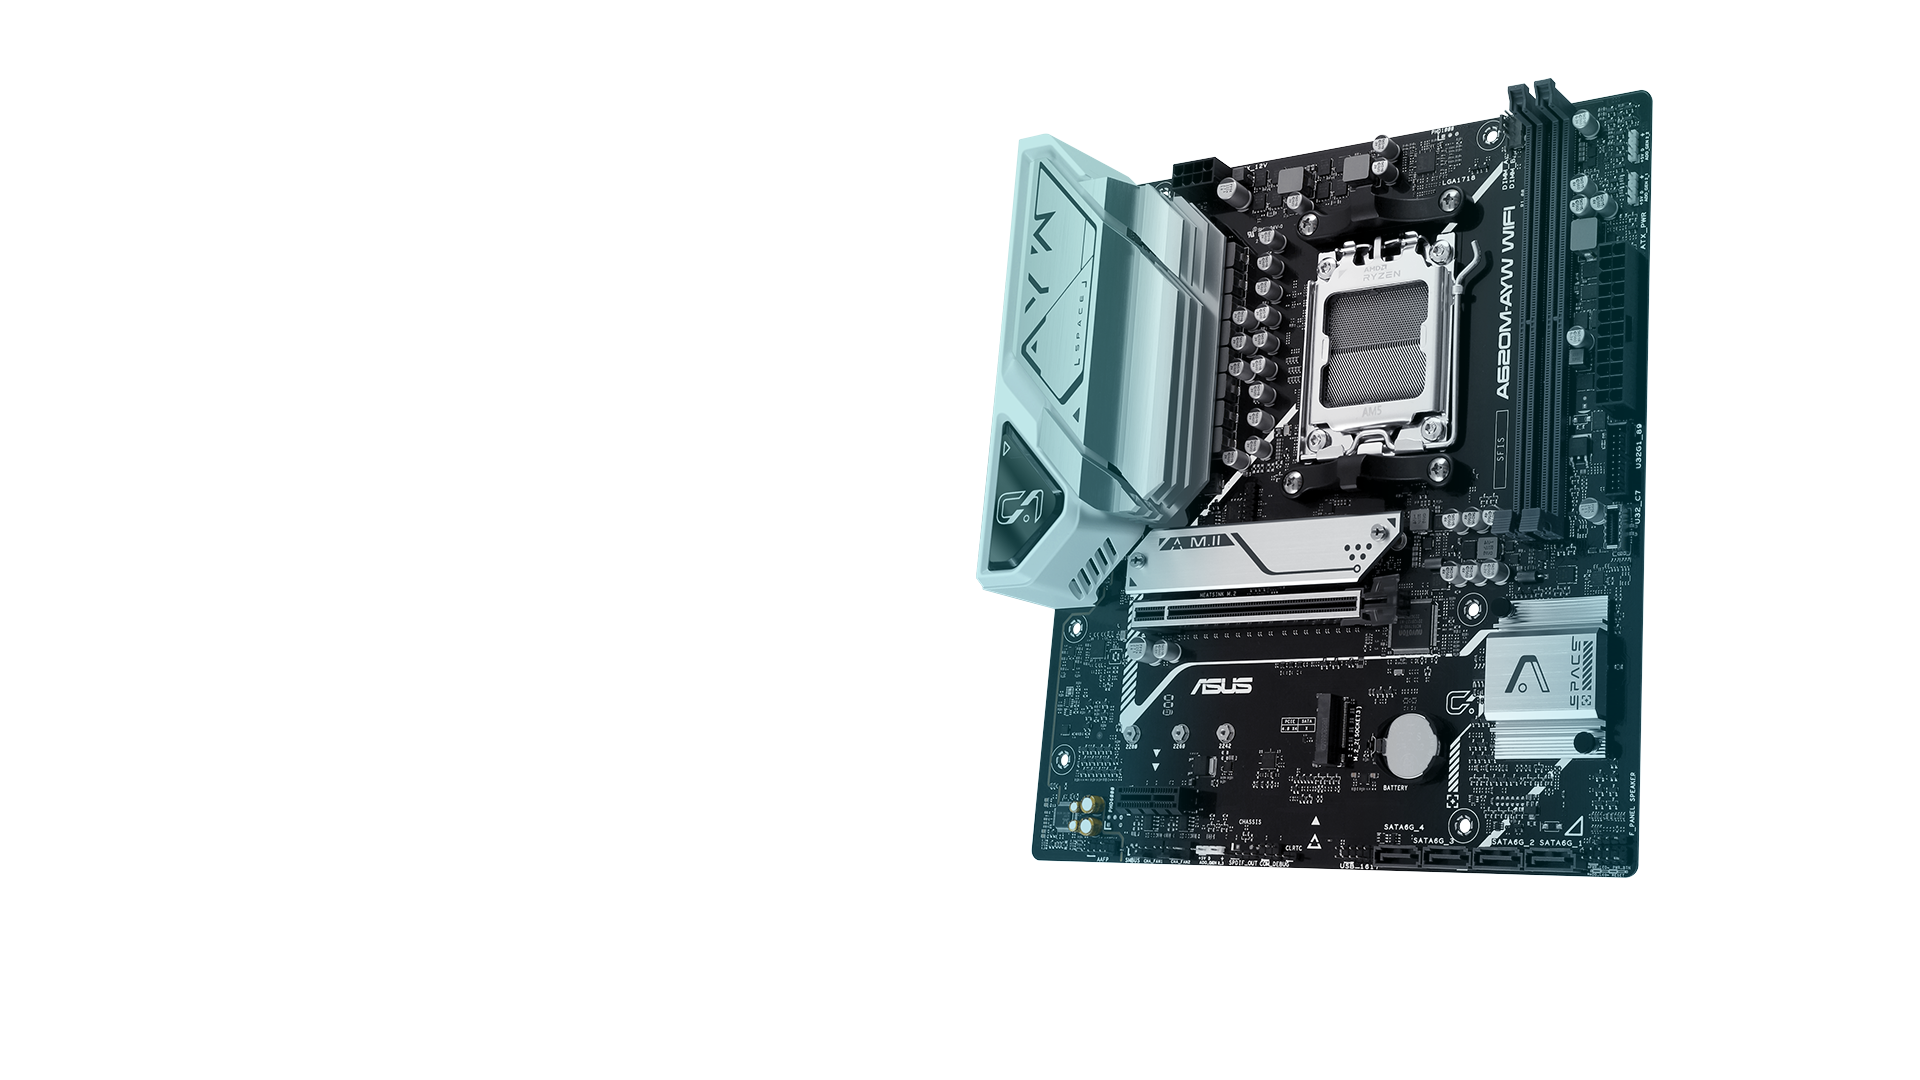 ASUS A620 series motherboard provides users and PC DIY builders a range of performance tuning options via intuitive software and firmware features.